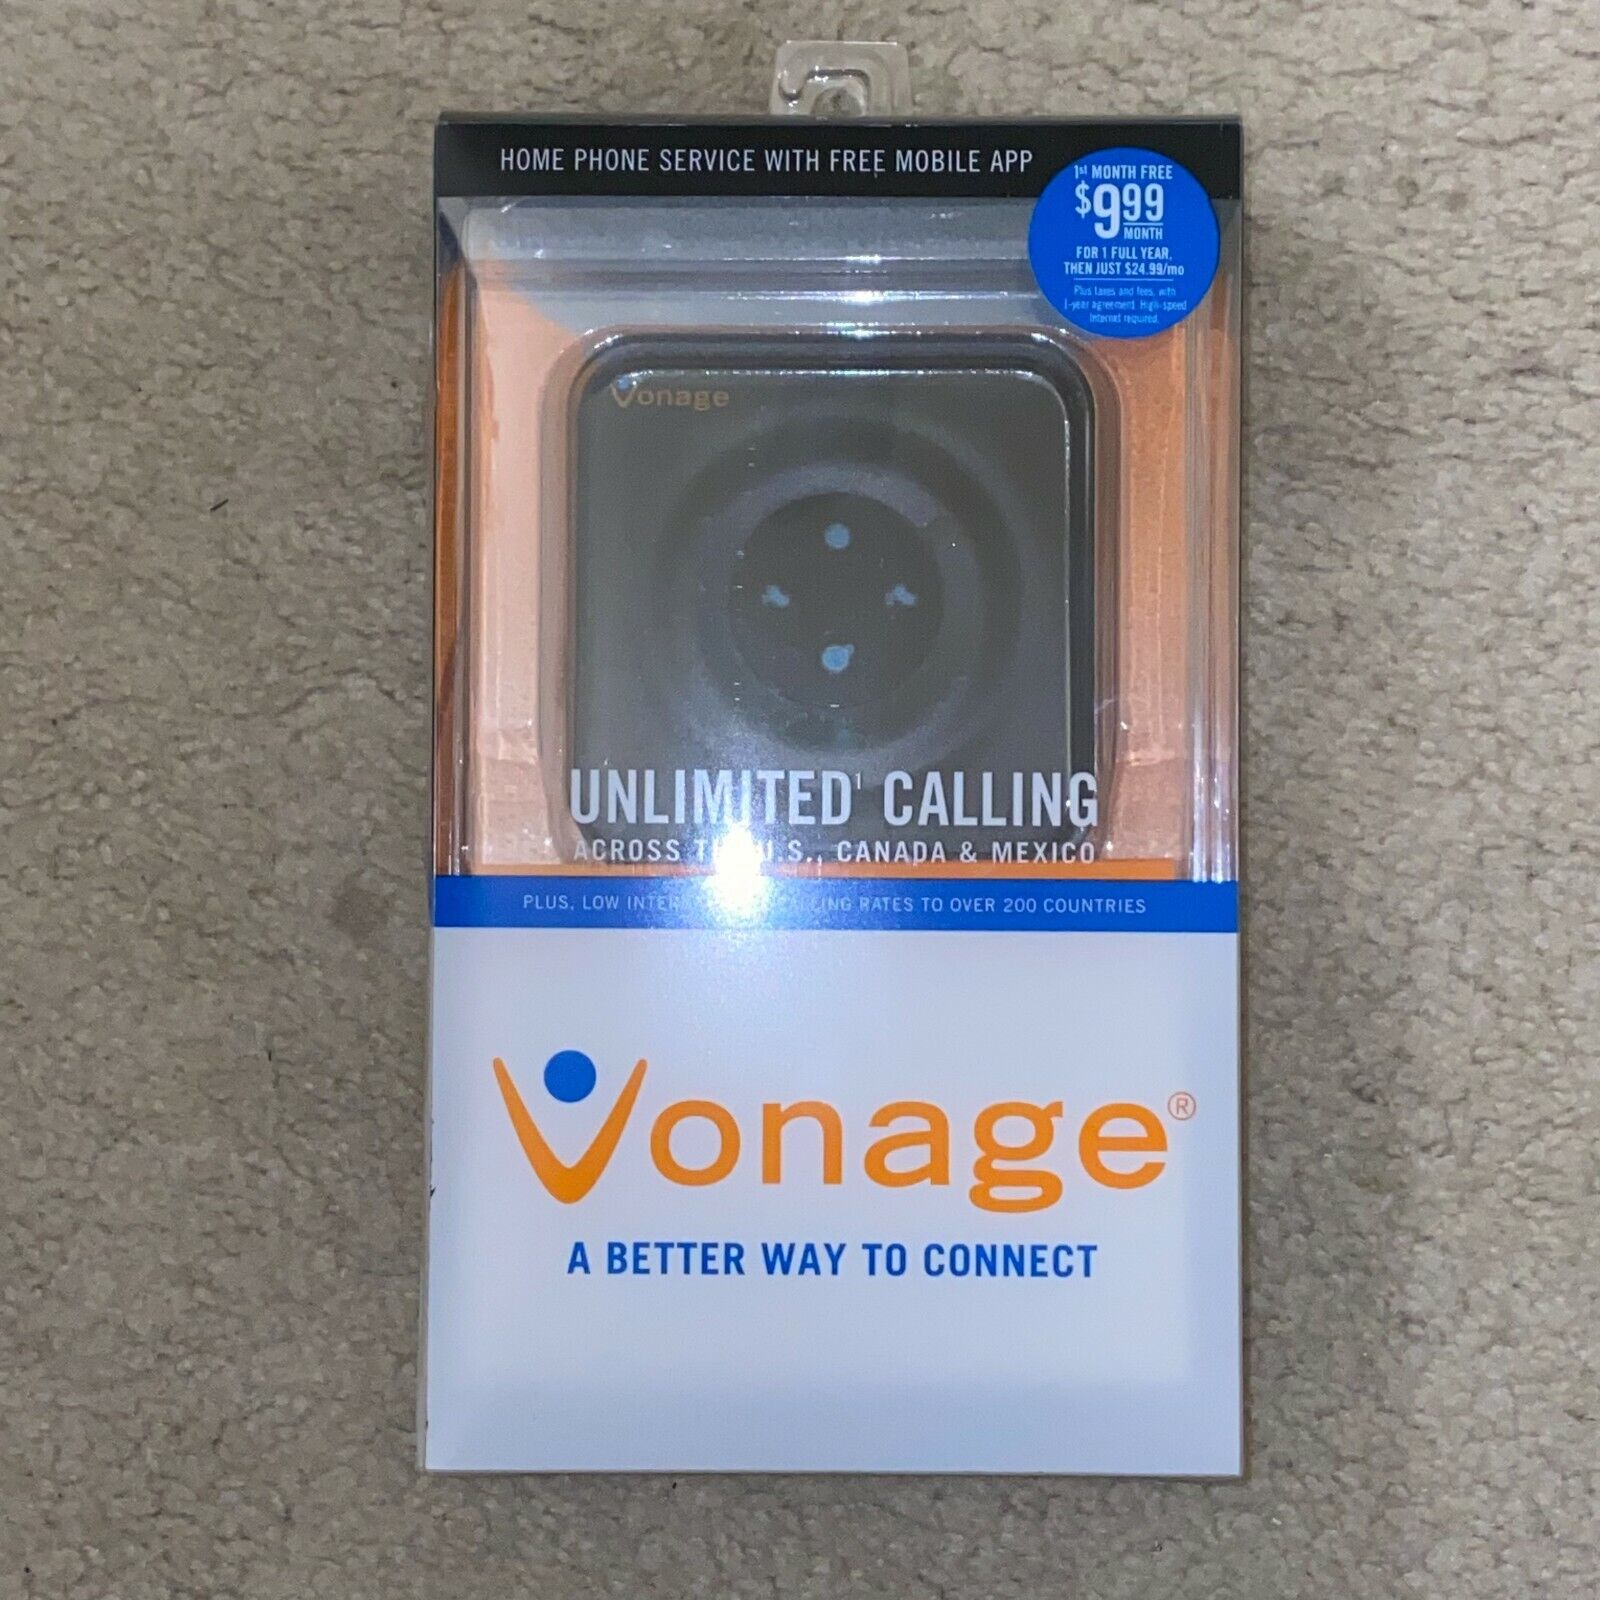 Vonage HT802-VD Telephone Adapter for VoIP Home Phone Service with Mobile Access